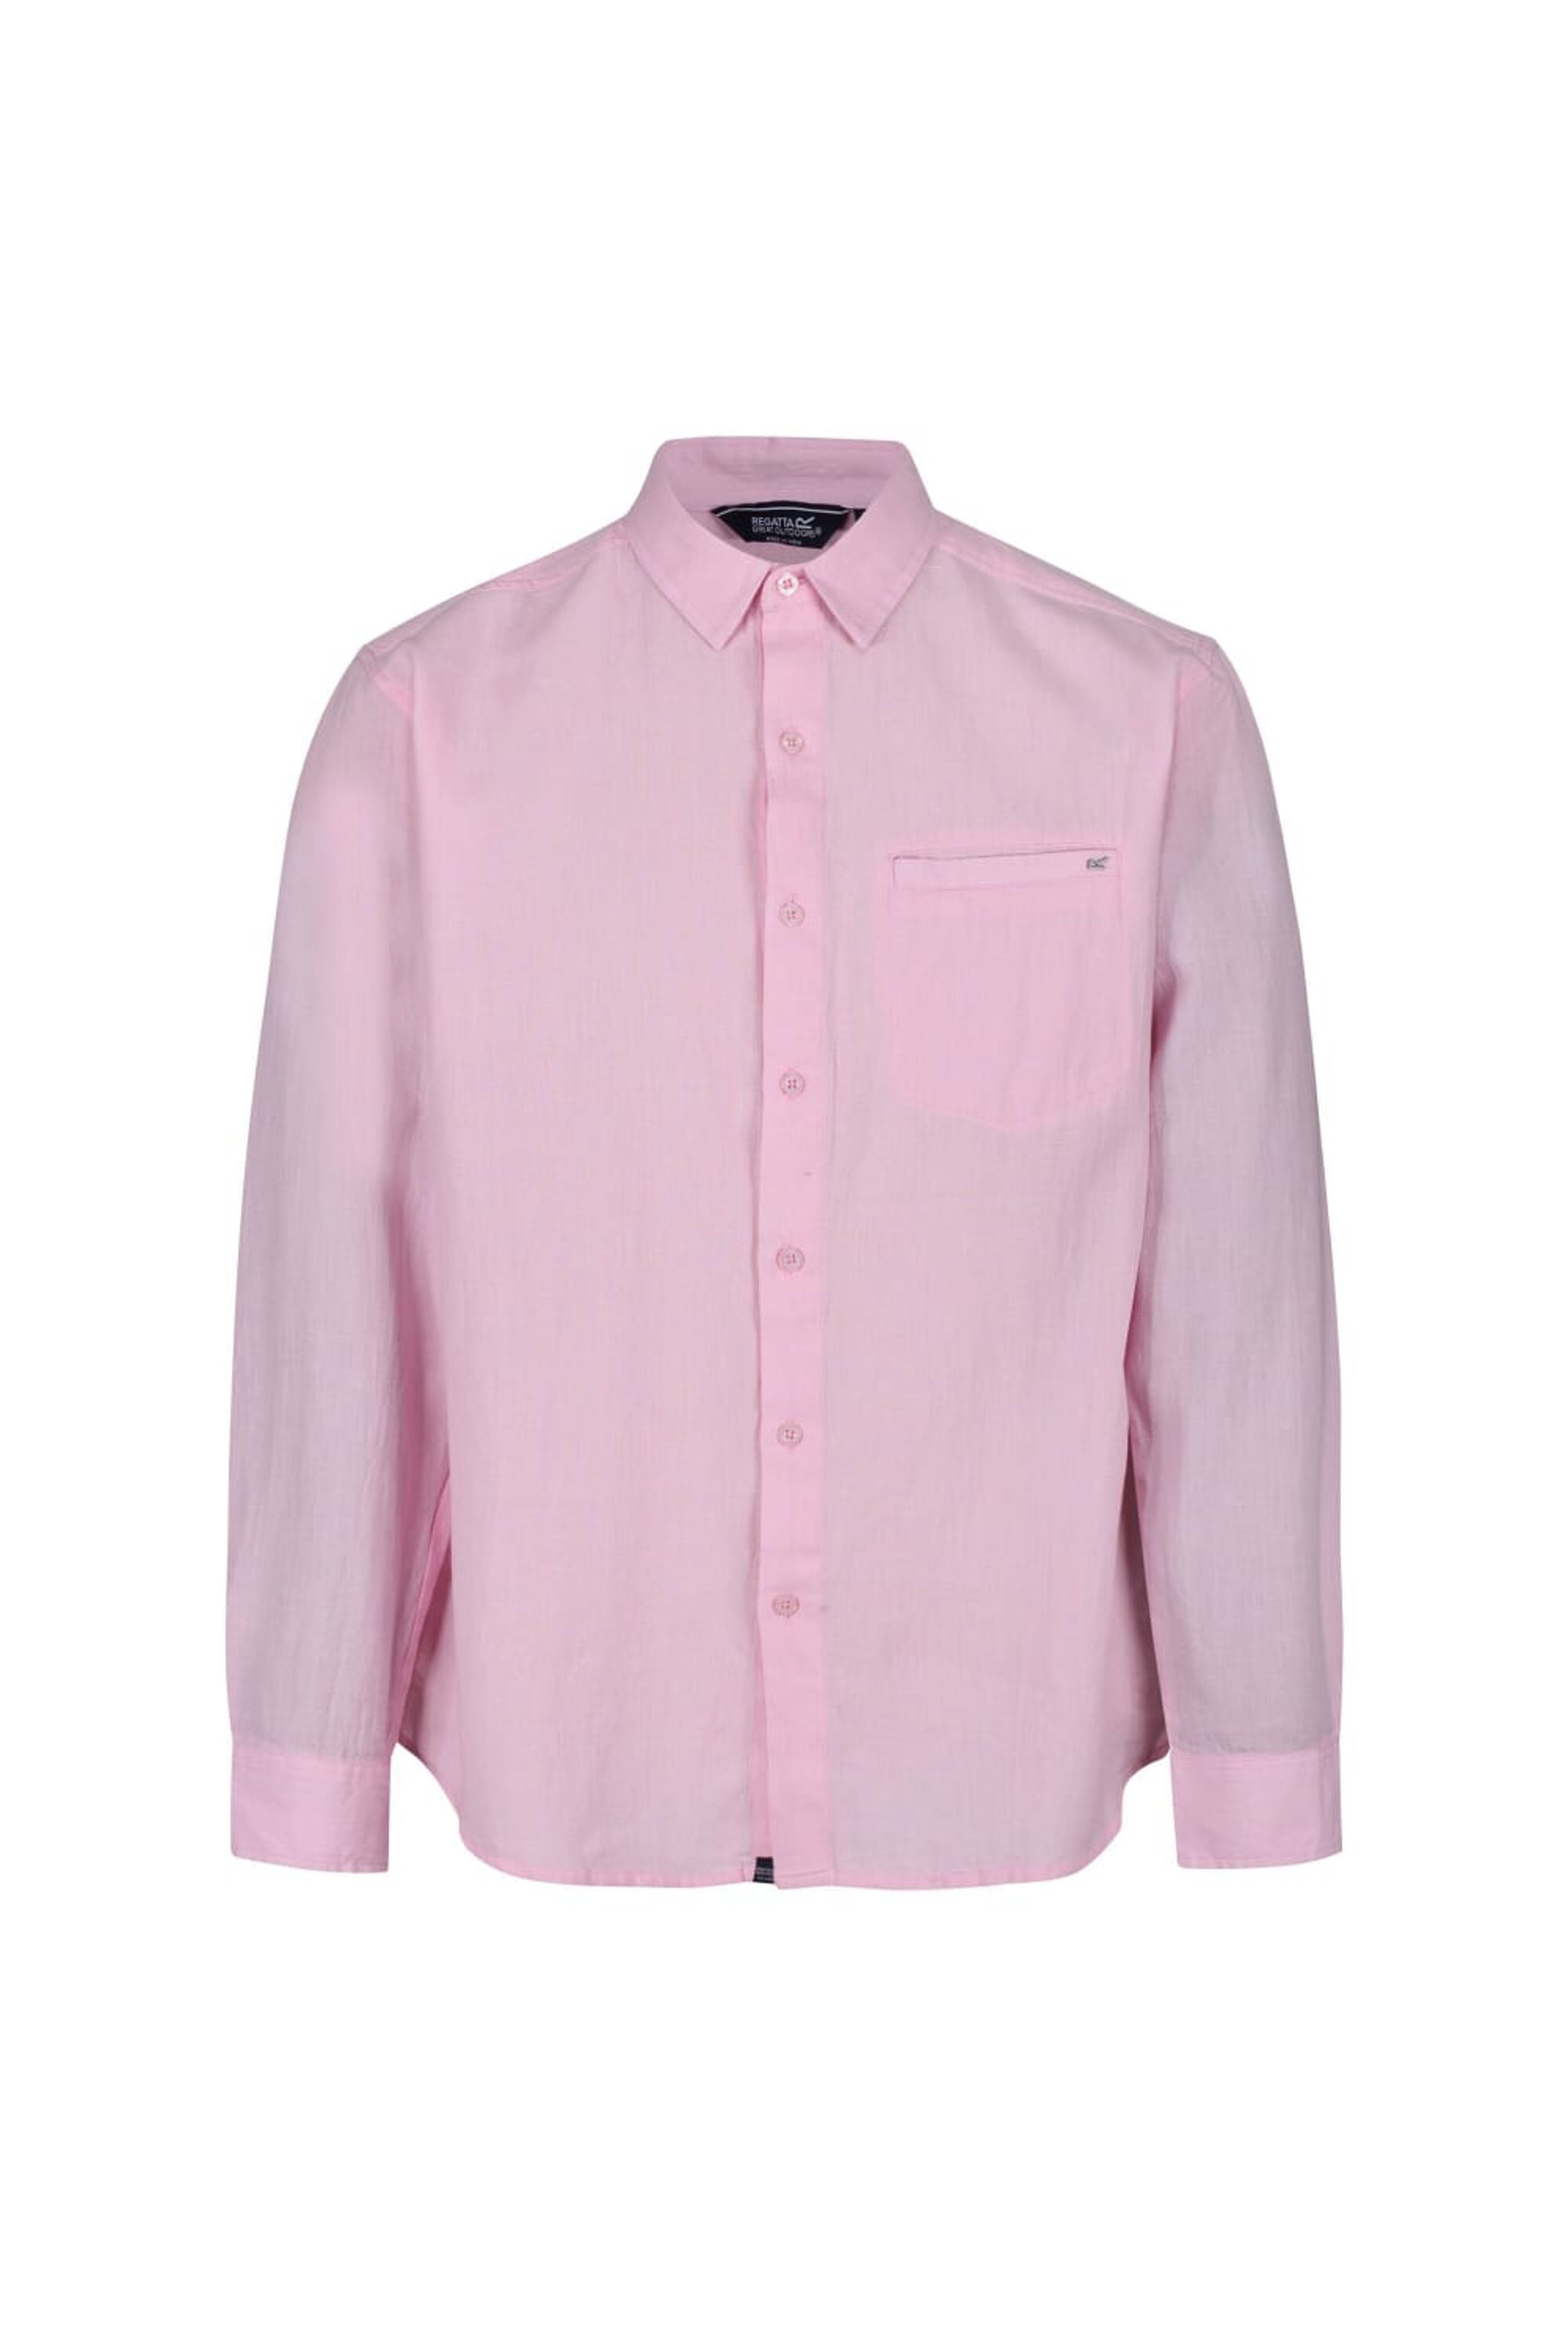 Regatta Mens Bard Coolweave Long-Sleeved Shirt (Pink) - S - Also in: XXL, M, XL, L | Verishop